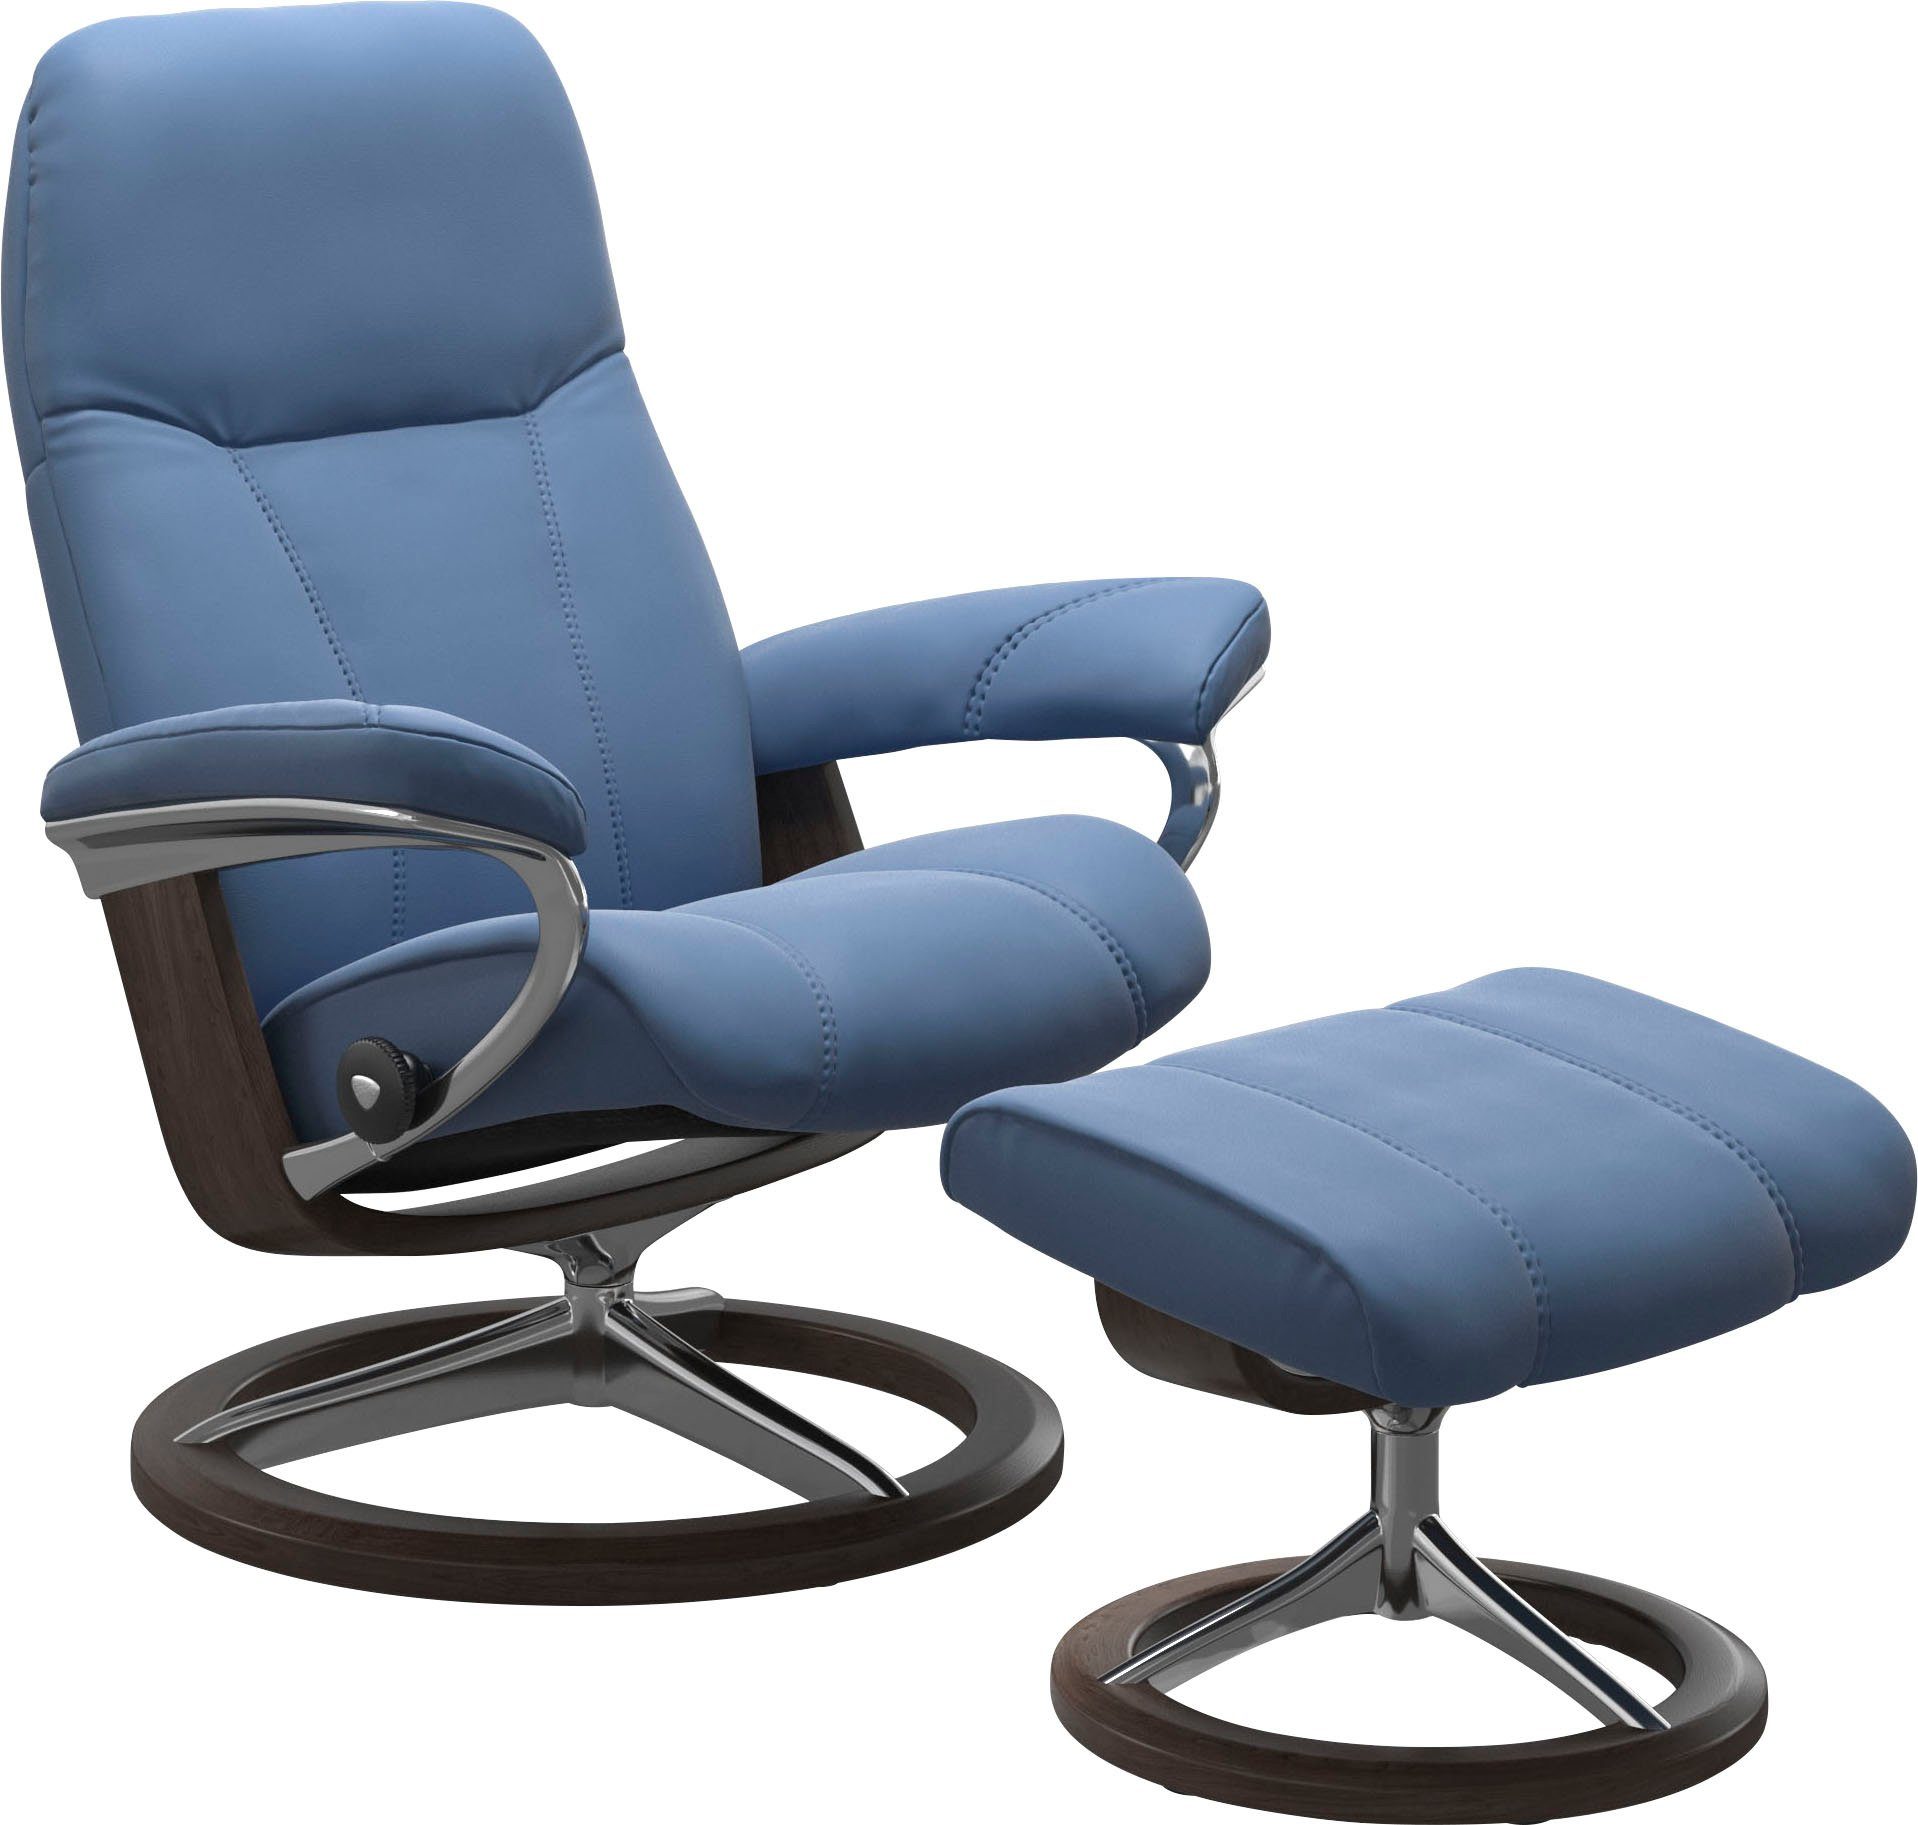 Consul, Wenge Gestell Signature Größe Relaxsessel mit Base, Stressless® L,